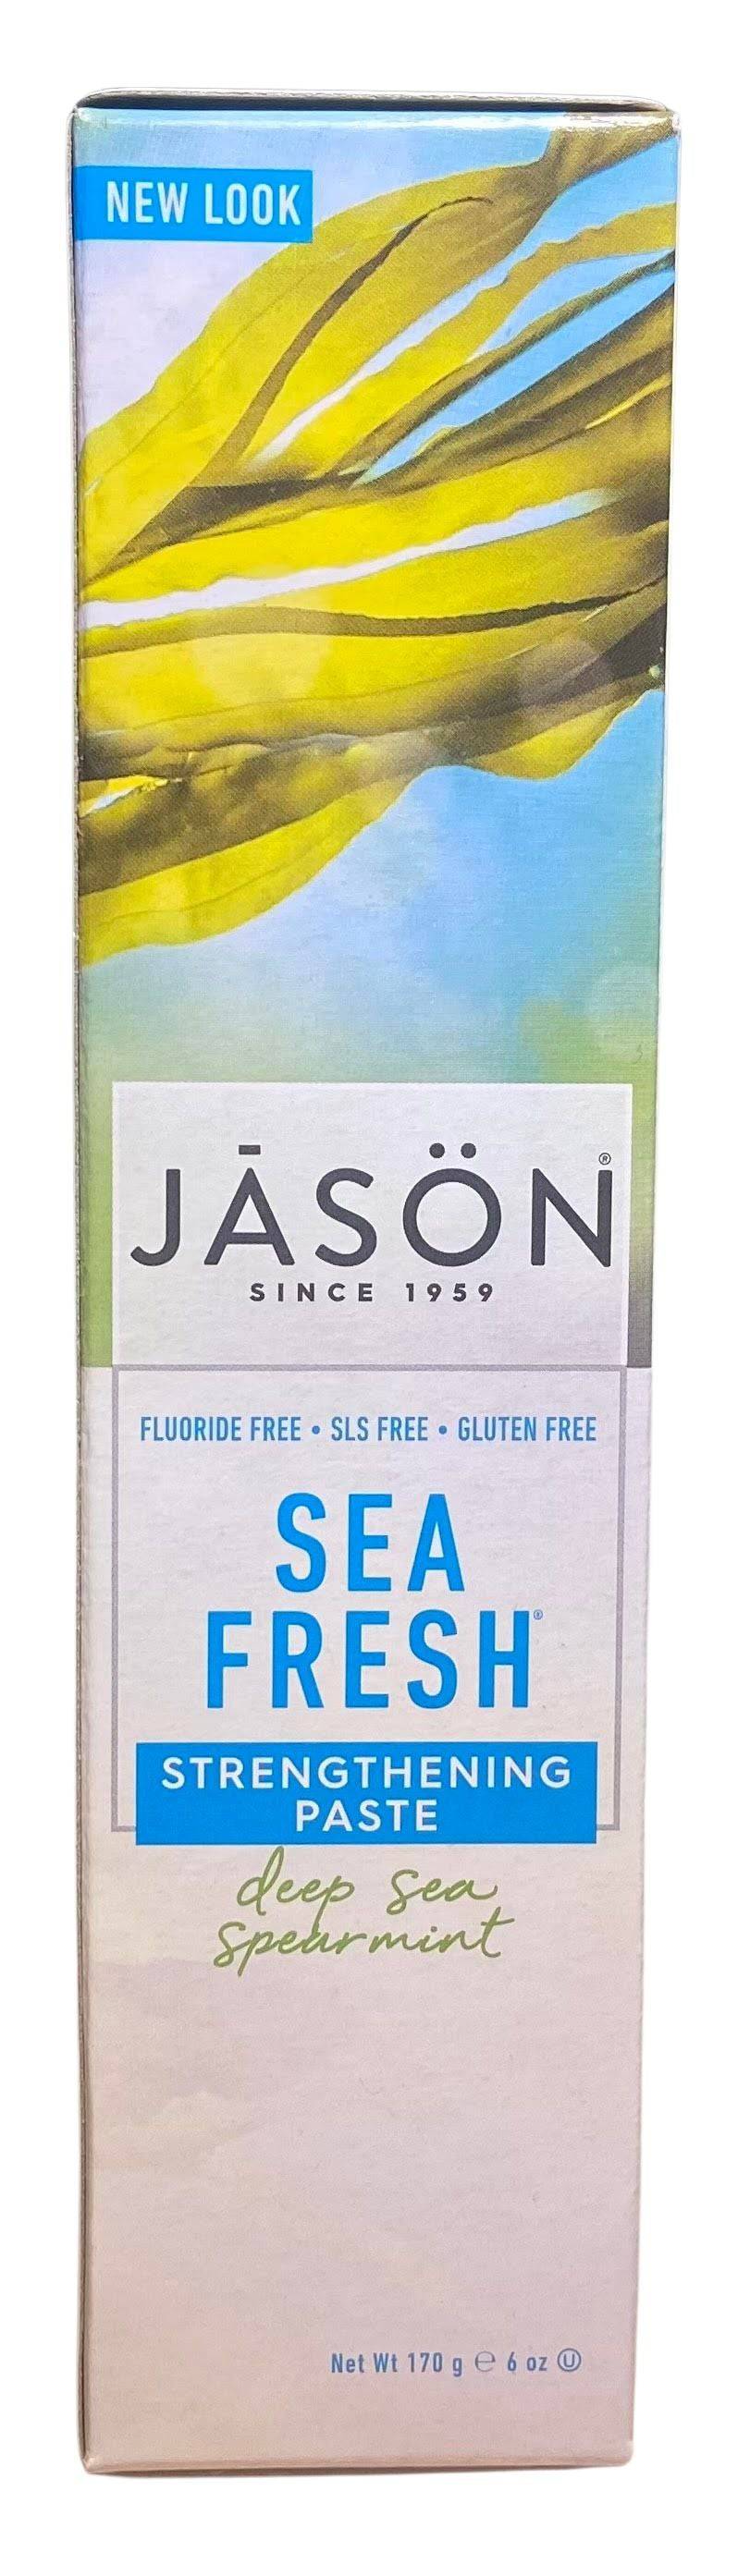 Jason Fluoride Free Toothpaste - Country Life Natural Foods